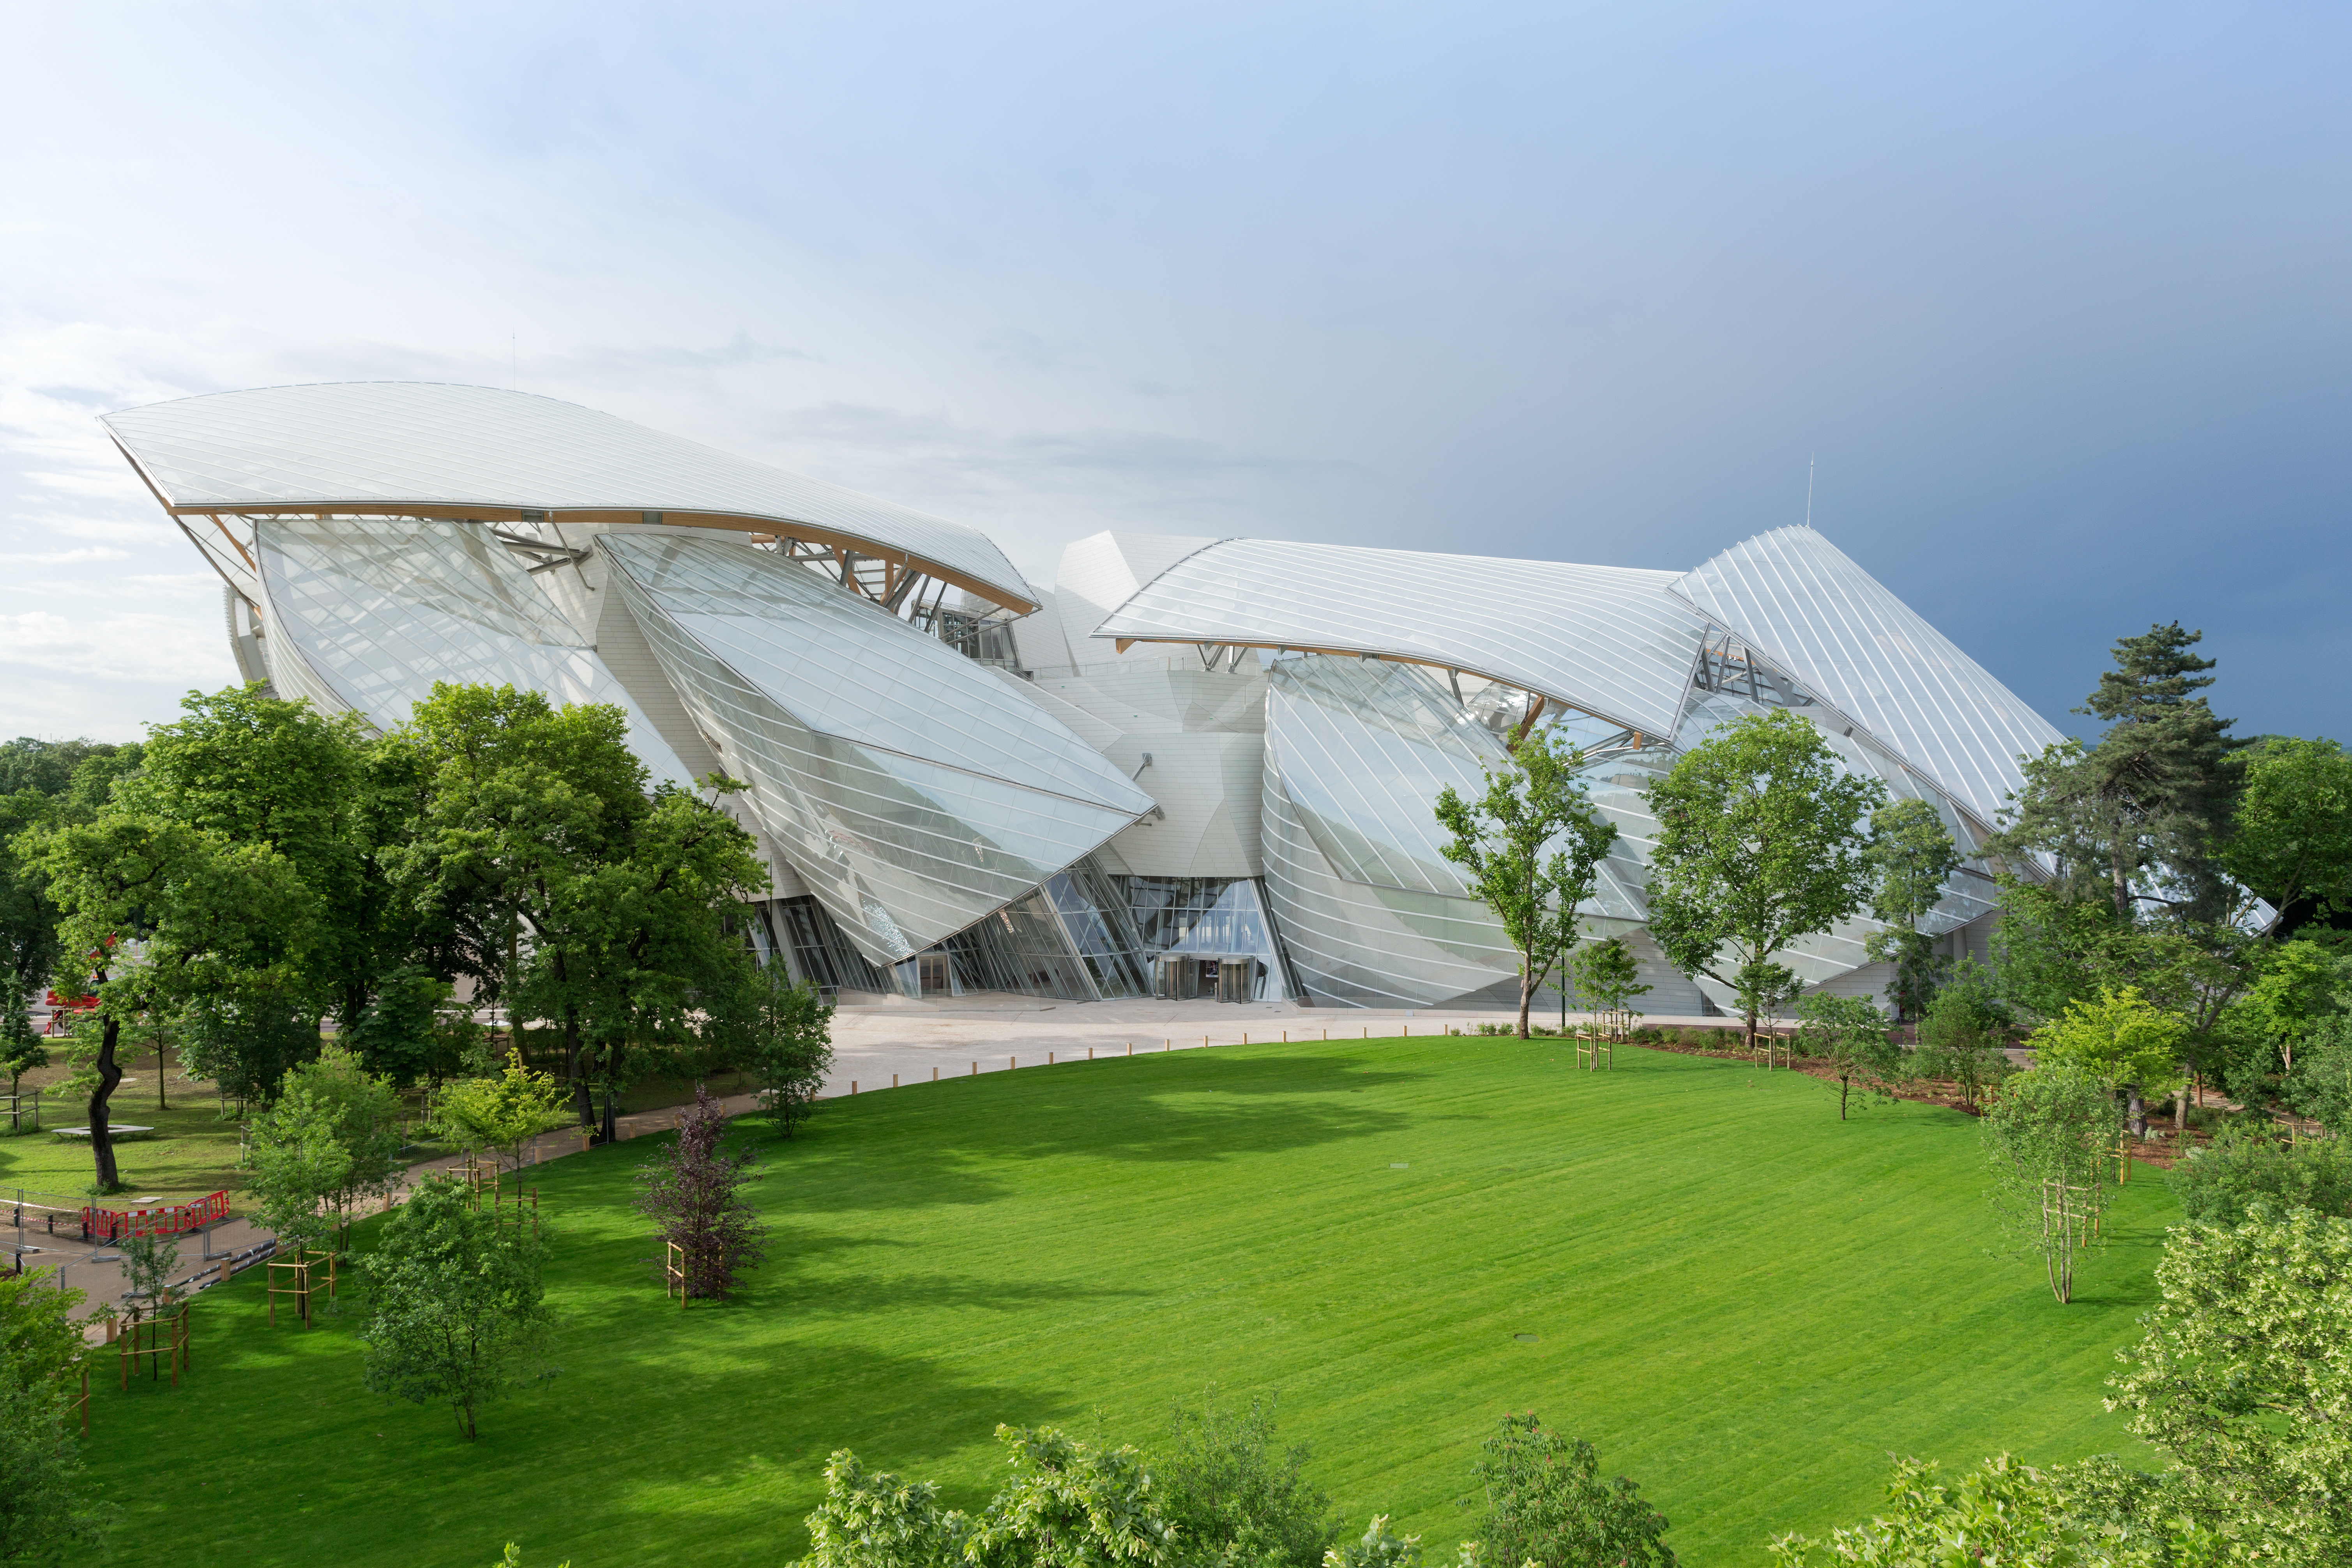 Espace Louis Vuitton Venice has inaugurated the new exhibition